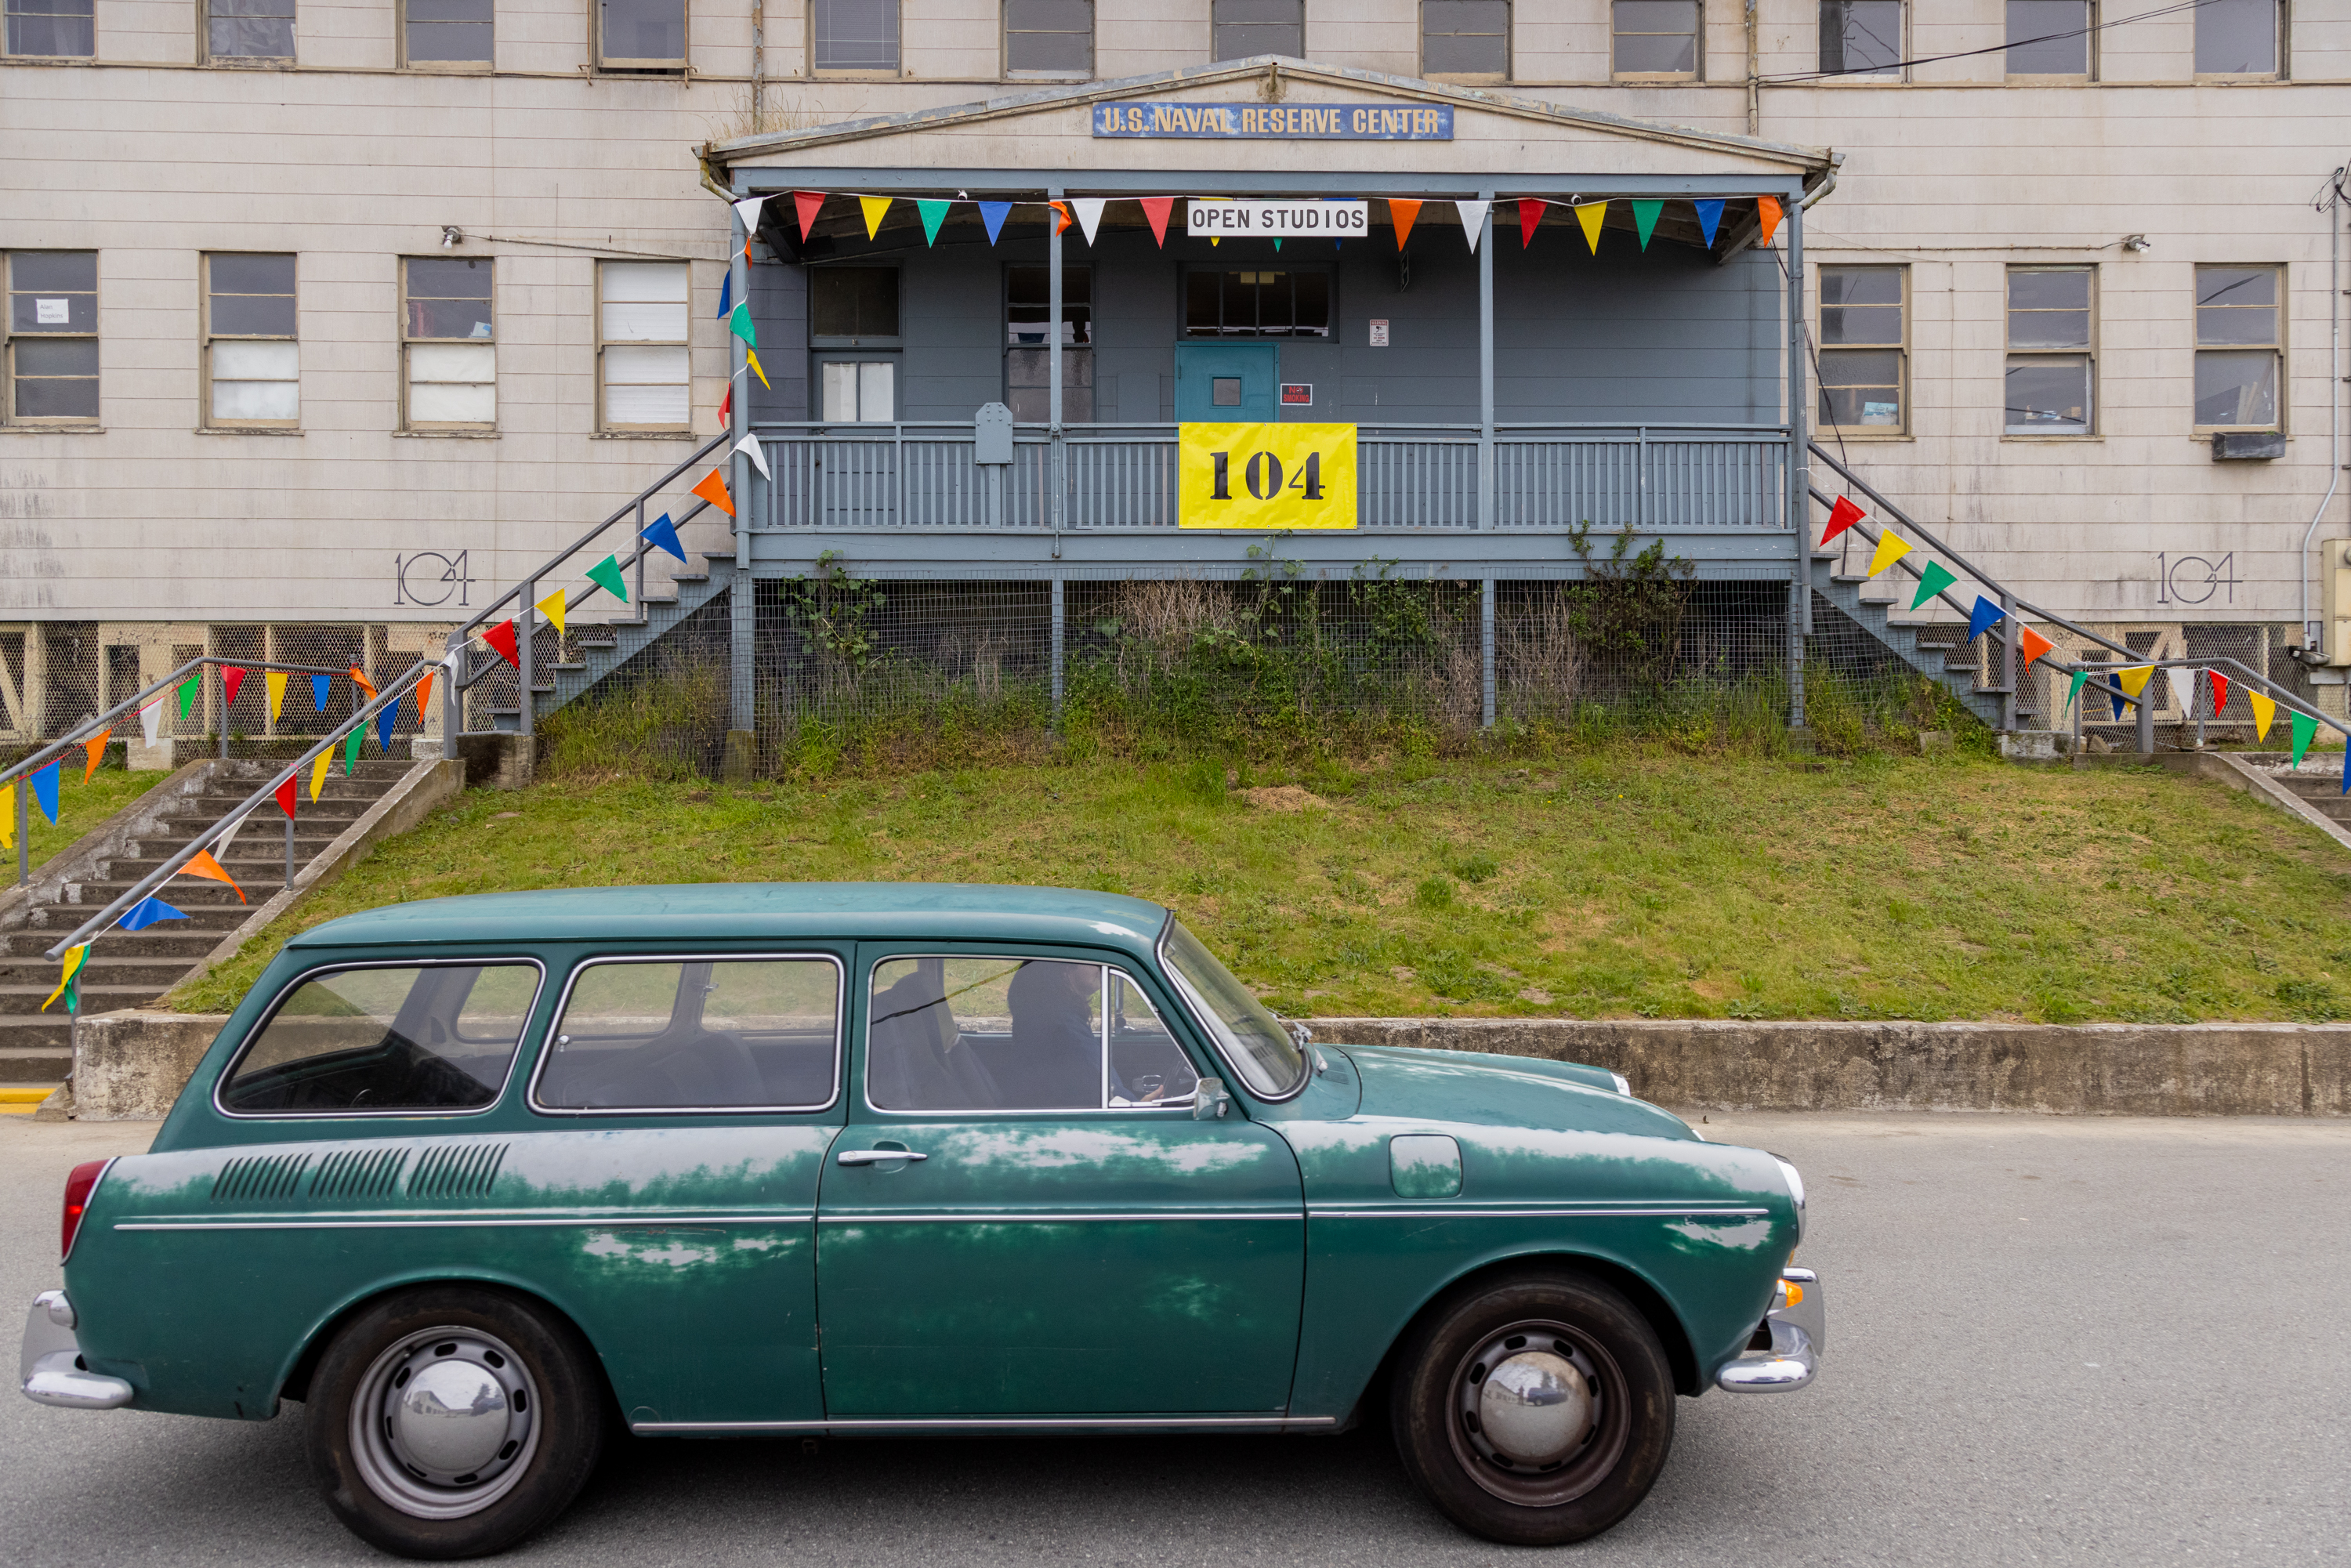 A vintage green car parked in front of a building with colorful banners and a sign &quot;OPEN STUDIOS&quot;.